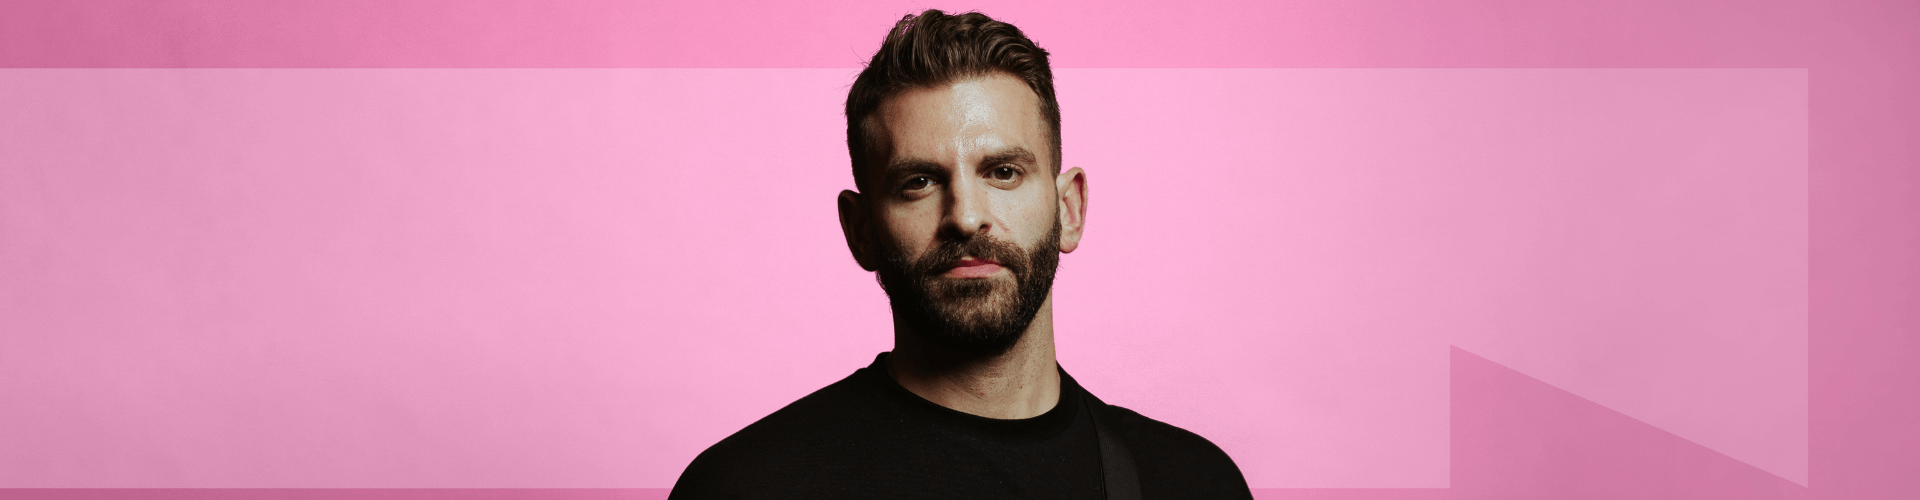 White person stands in front of a pink background, wearing black, with a beard and short hair. An arrow is visible in the background